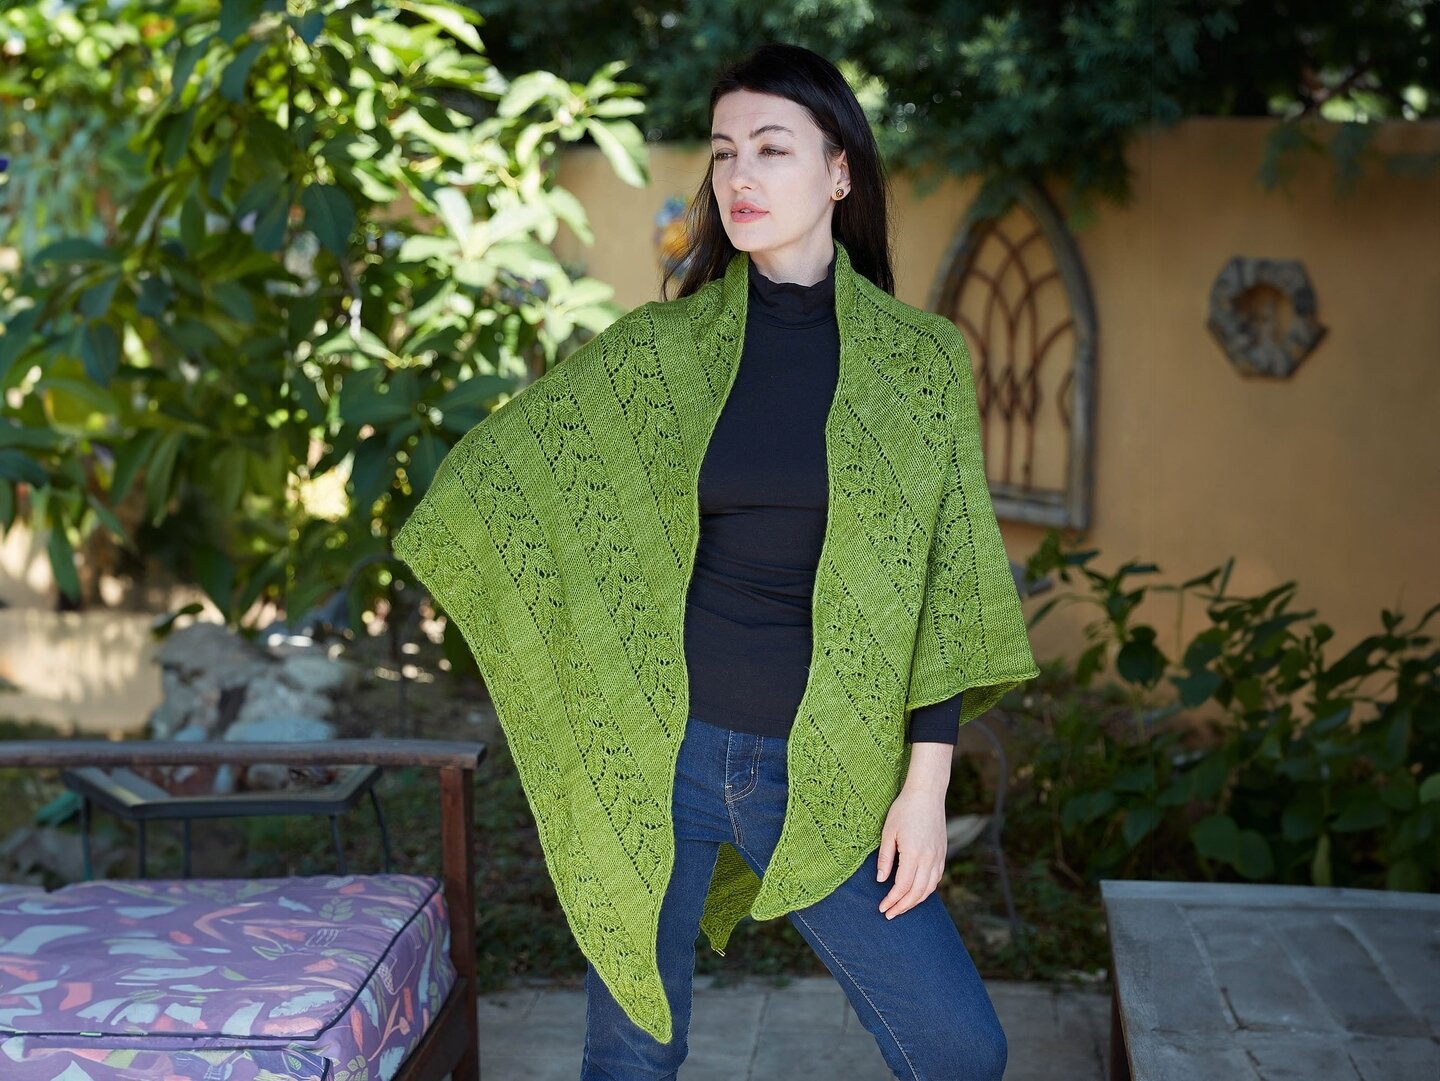 Thank you for the warm welcome for Esprit d'Evelyn!

For several years, I'd been wanting to design a shawl knit with green yarn in honor of my mom, Evelyn. Her favorite color was green, and it became my favorite color for a long time.

The timing for